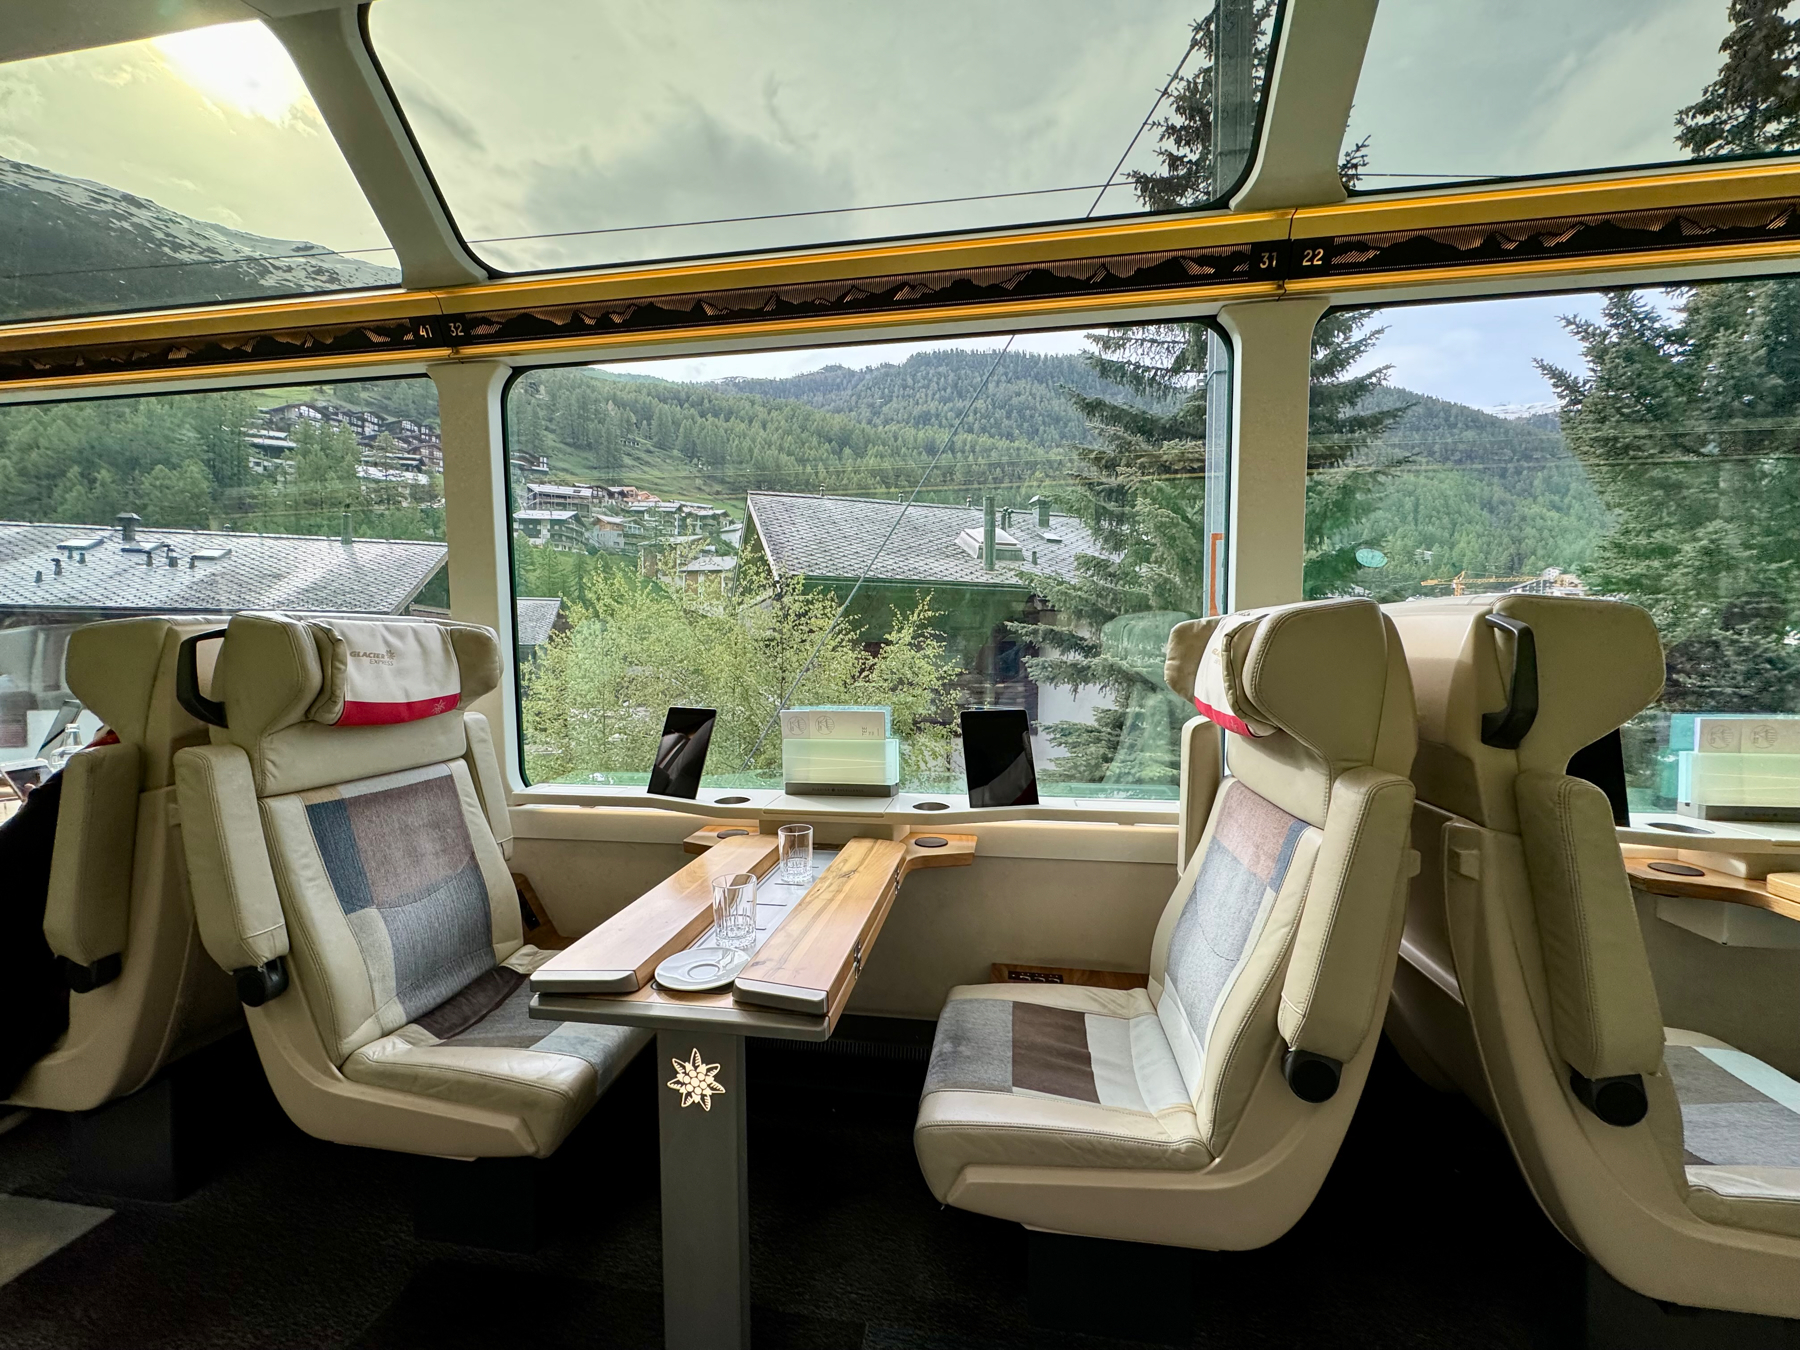 The image shows the interior of the Glacier Express train with spacious seating, large windows providing scenic views of lush greenery, houses, and mountains in the background. The seats are arranged around a central table, with clear glasses placed on top. The train has a luxurious